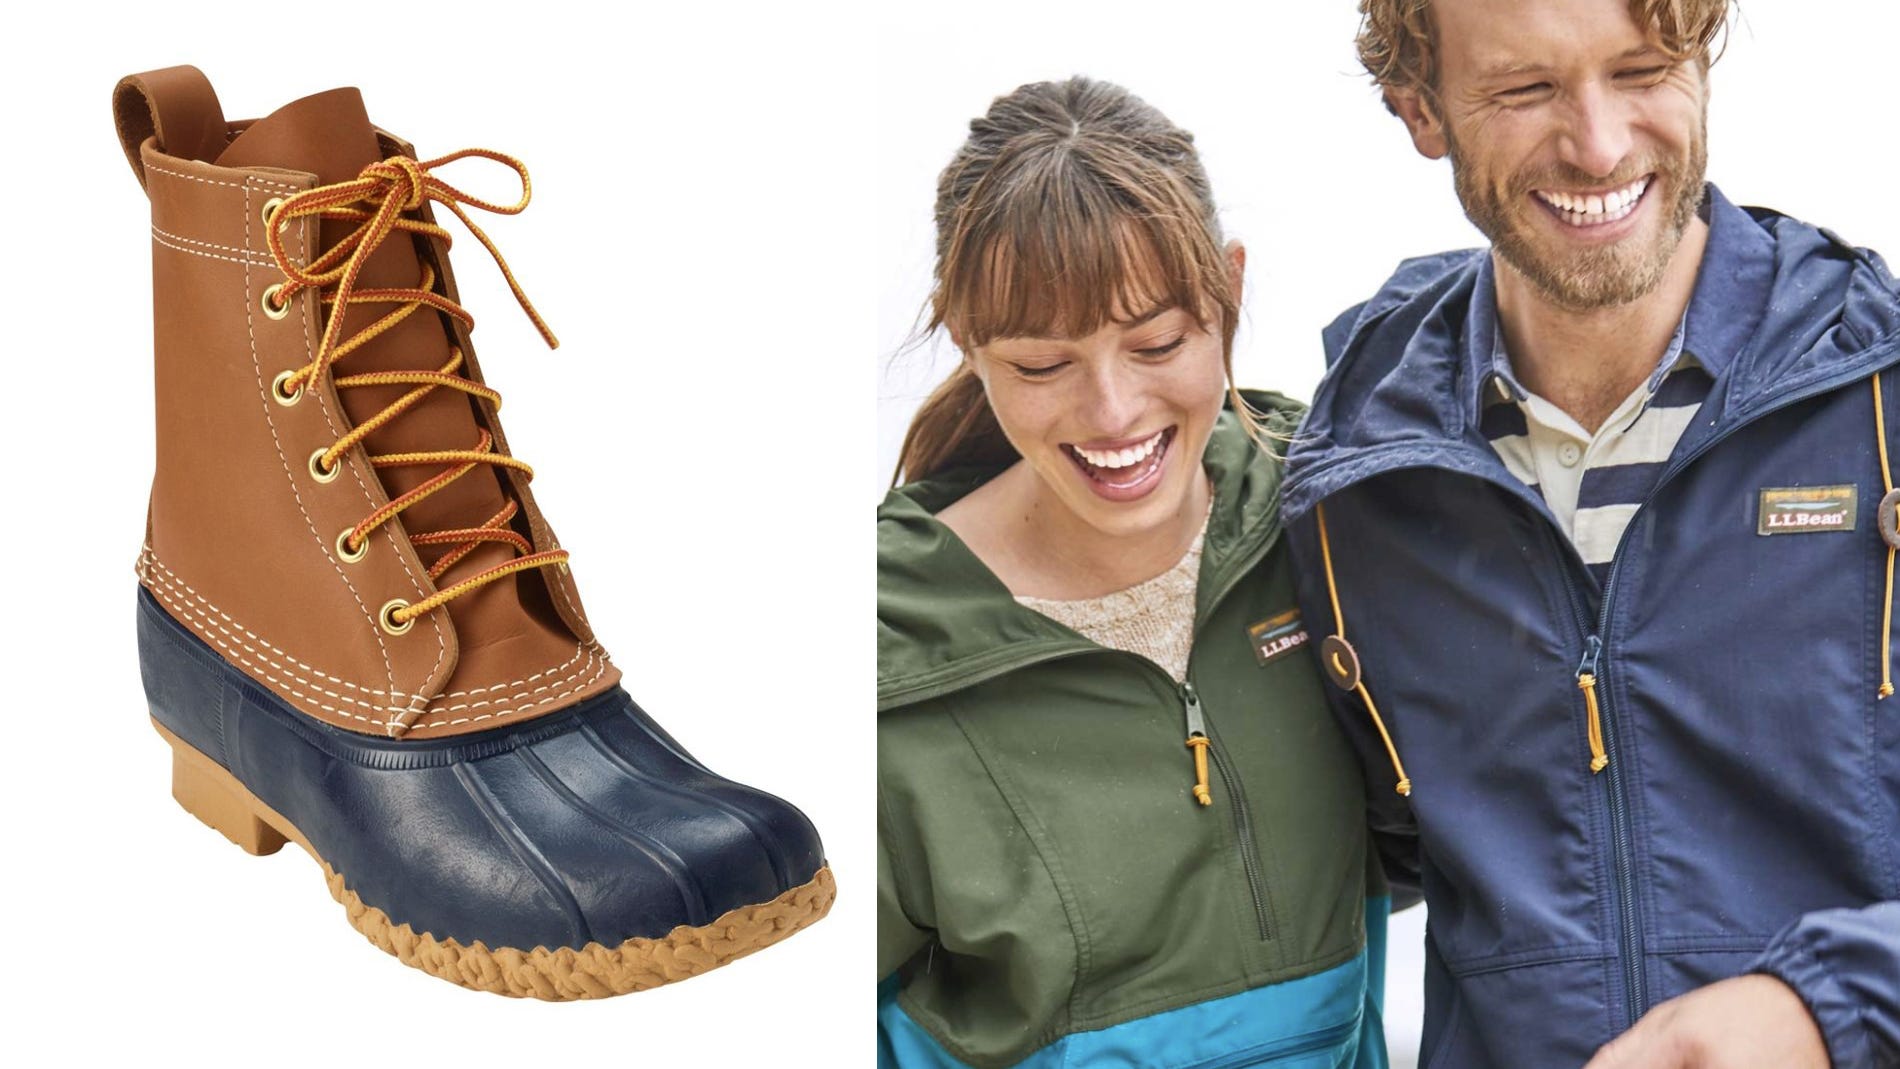 Rain jacket and boot sales: The best 